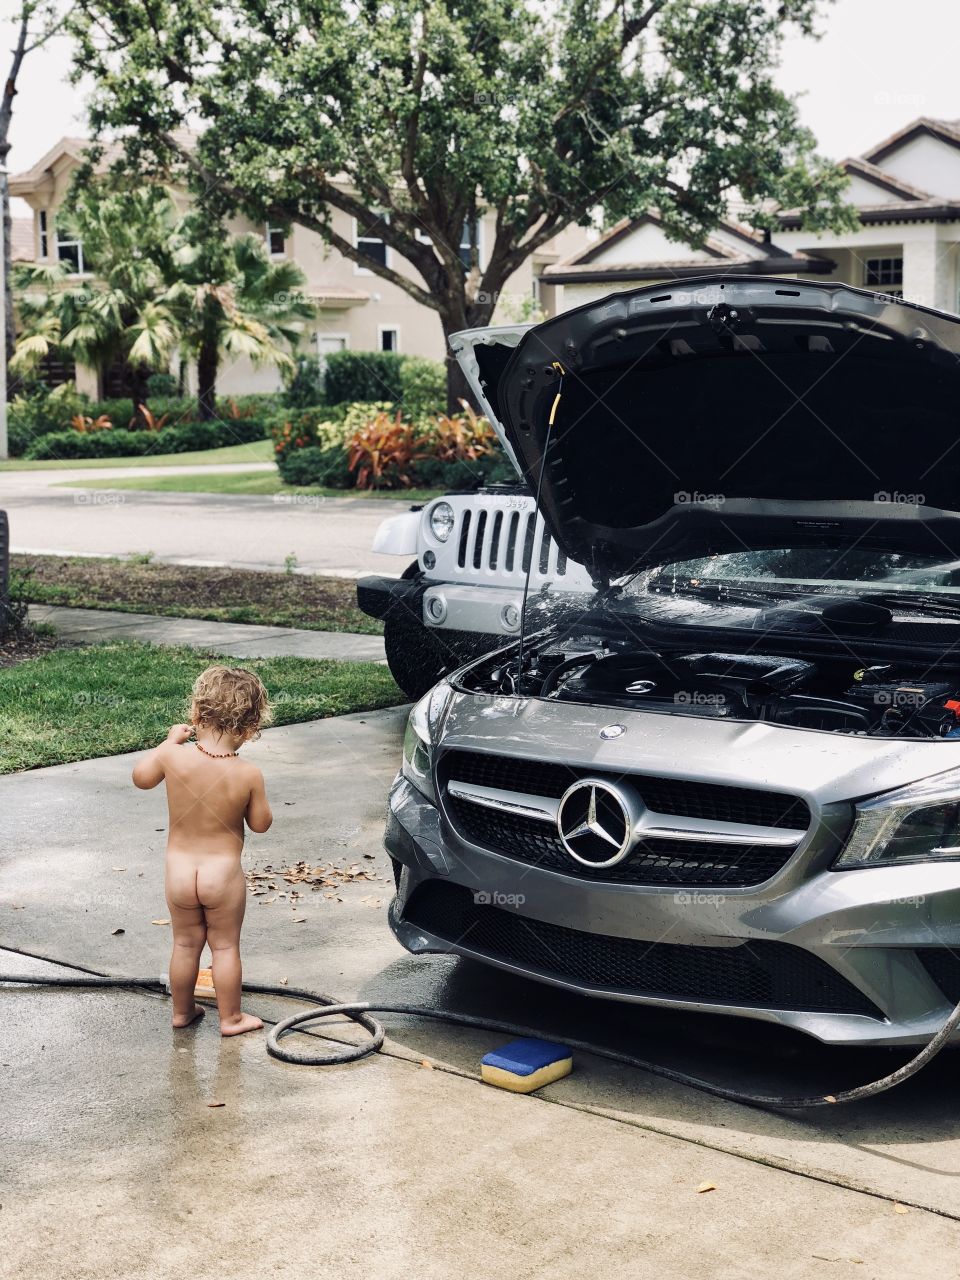 Small child helping wash the cars 